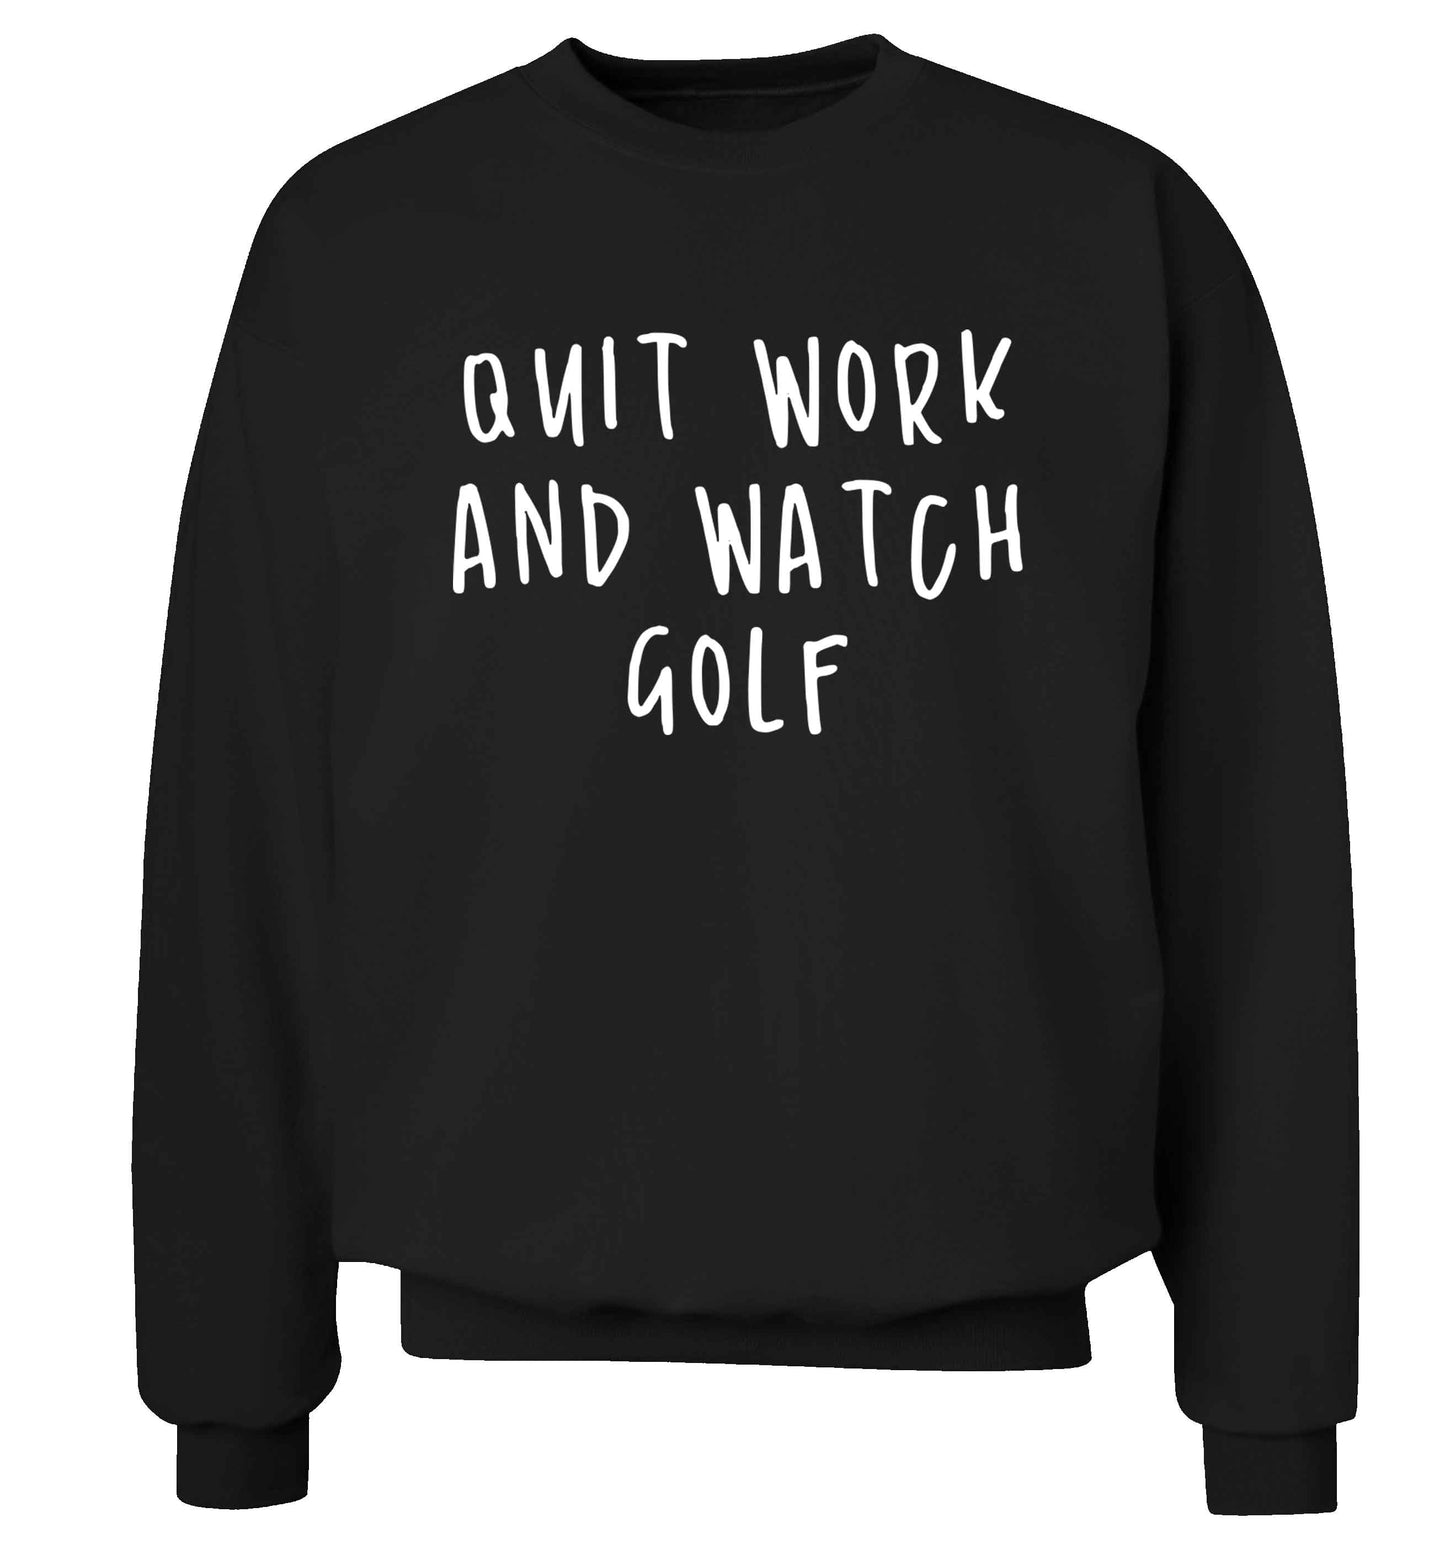 Quit work and watch golf Adult's unisex black Sweater 2XL